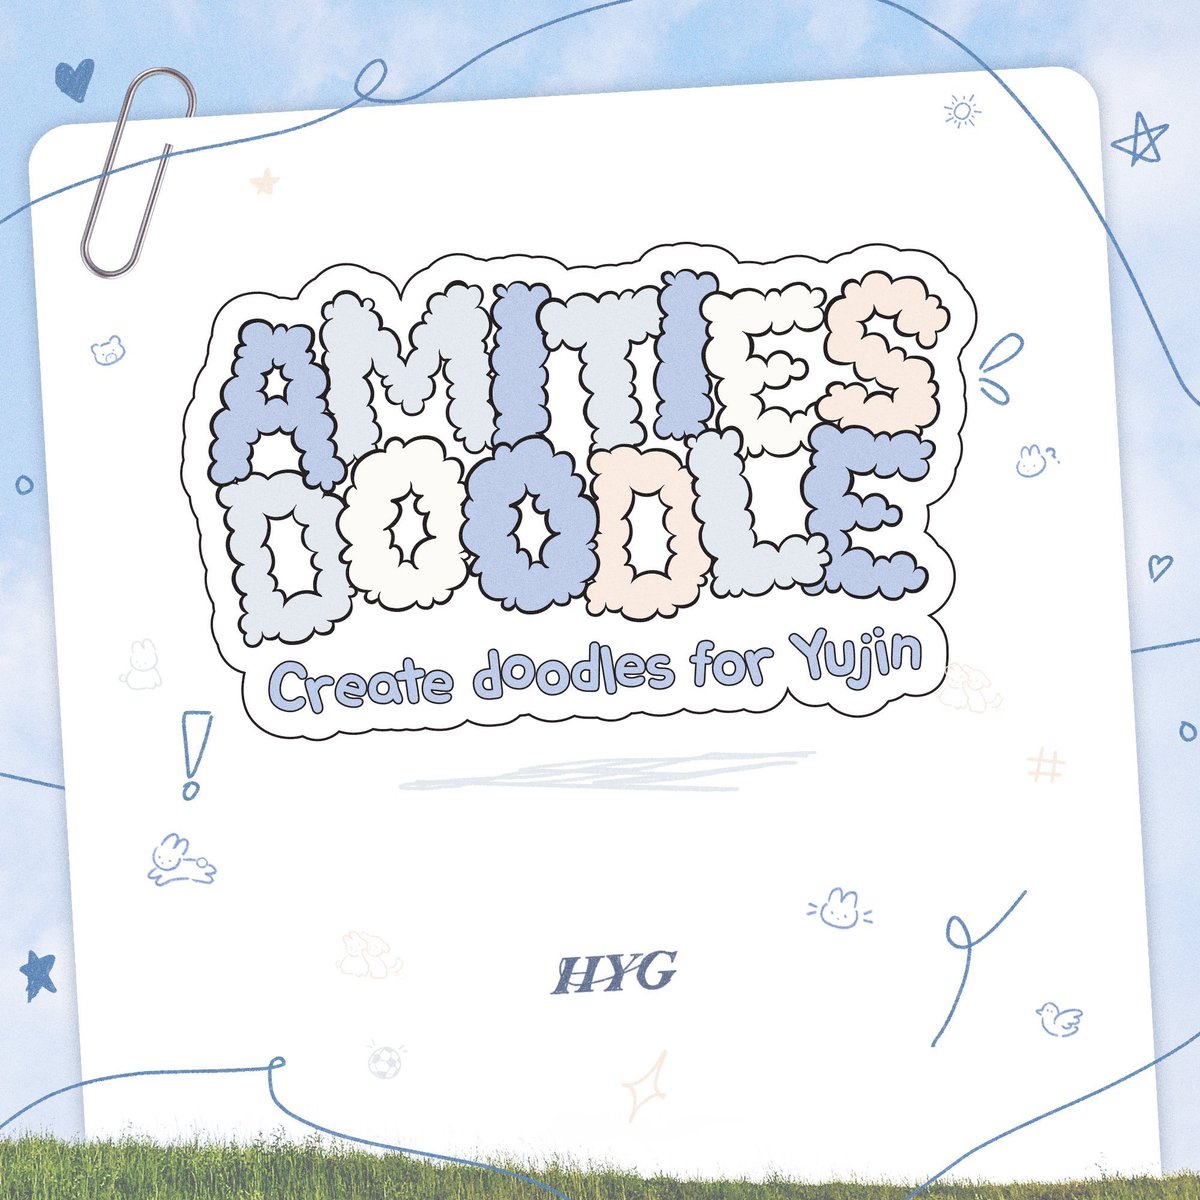 We are collecting adorable doodles to include in the book. We would love for Yujin to see the lovely doodles created by ZEROSEs. Please share your doodles using the link provided below. 
 
🔗 tinyurl.com/AMITIESDOODLE 
 
#AMITIESOFHYJ #HANYUJIN #한유진